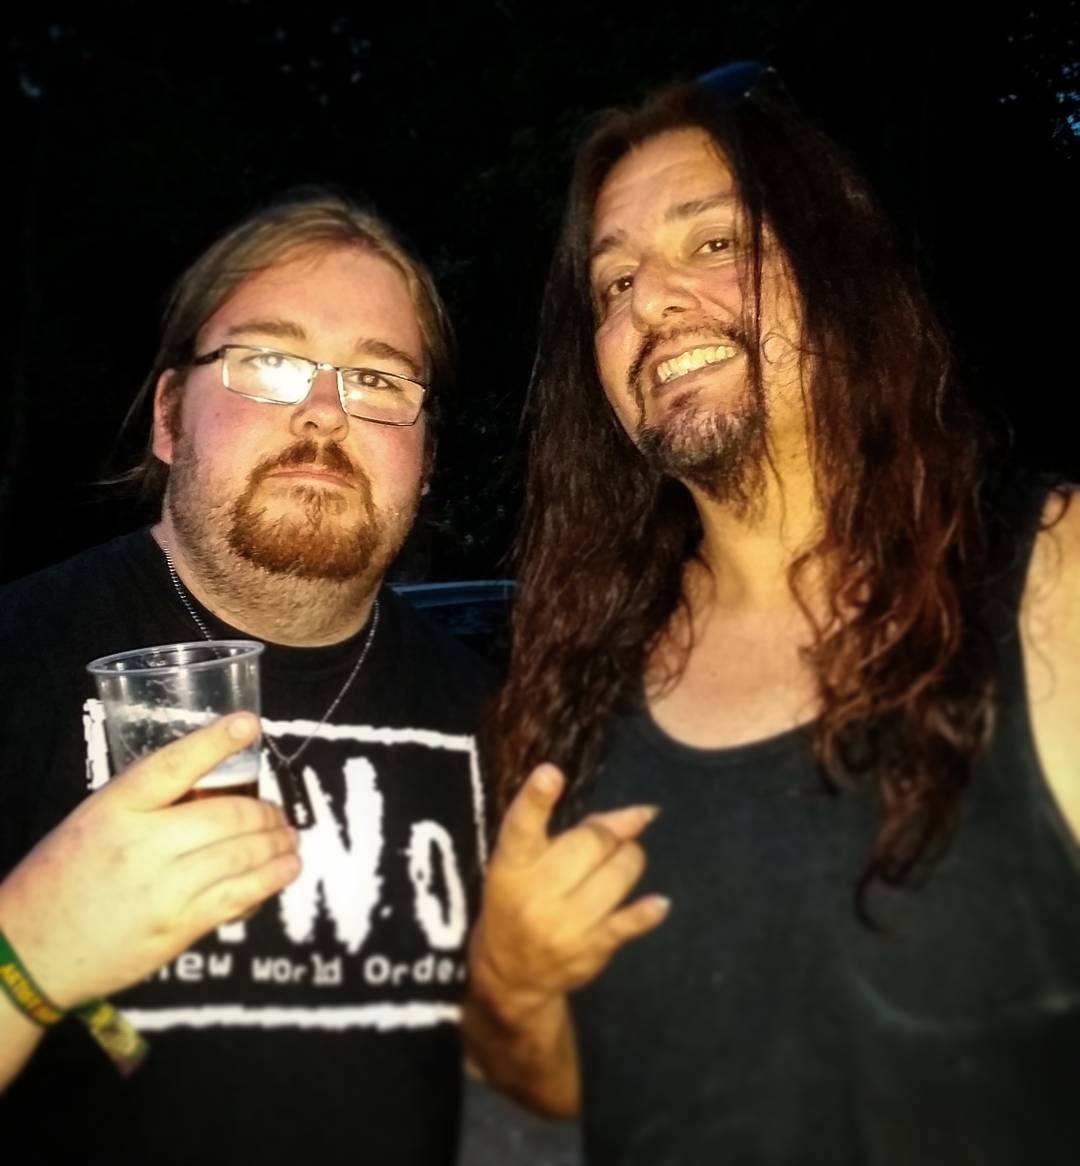 Throwback to @BLOODSTOCKFEST 2015 where we got to hang out with the legend that is @GeneHoglan! Awesome weekend #BloodstockFamily